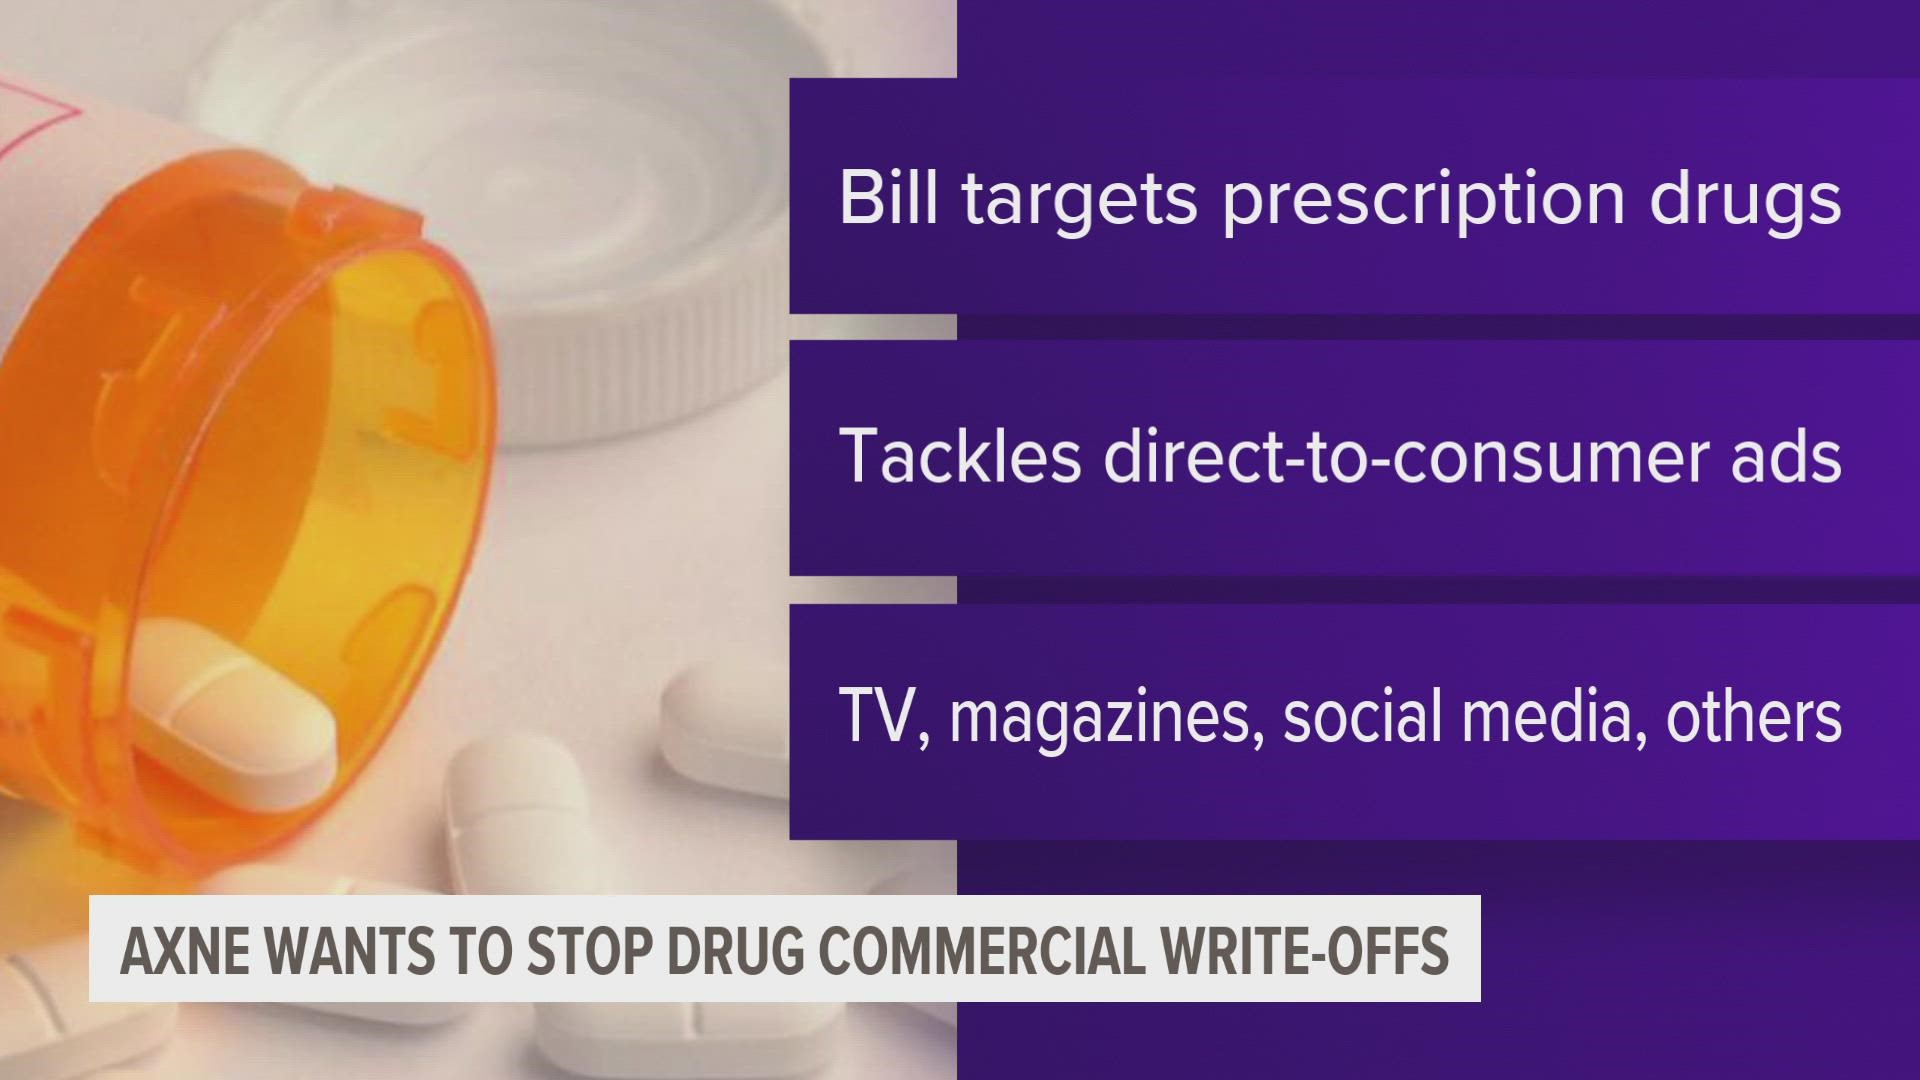 Currently, pharmaceutical companies get tax breaks every time a drug commercial runs.